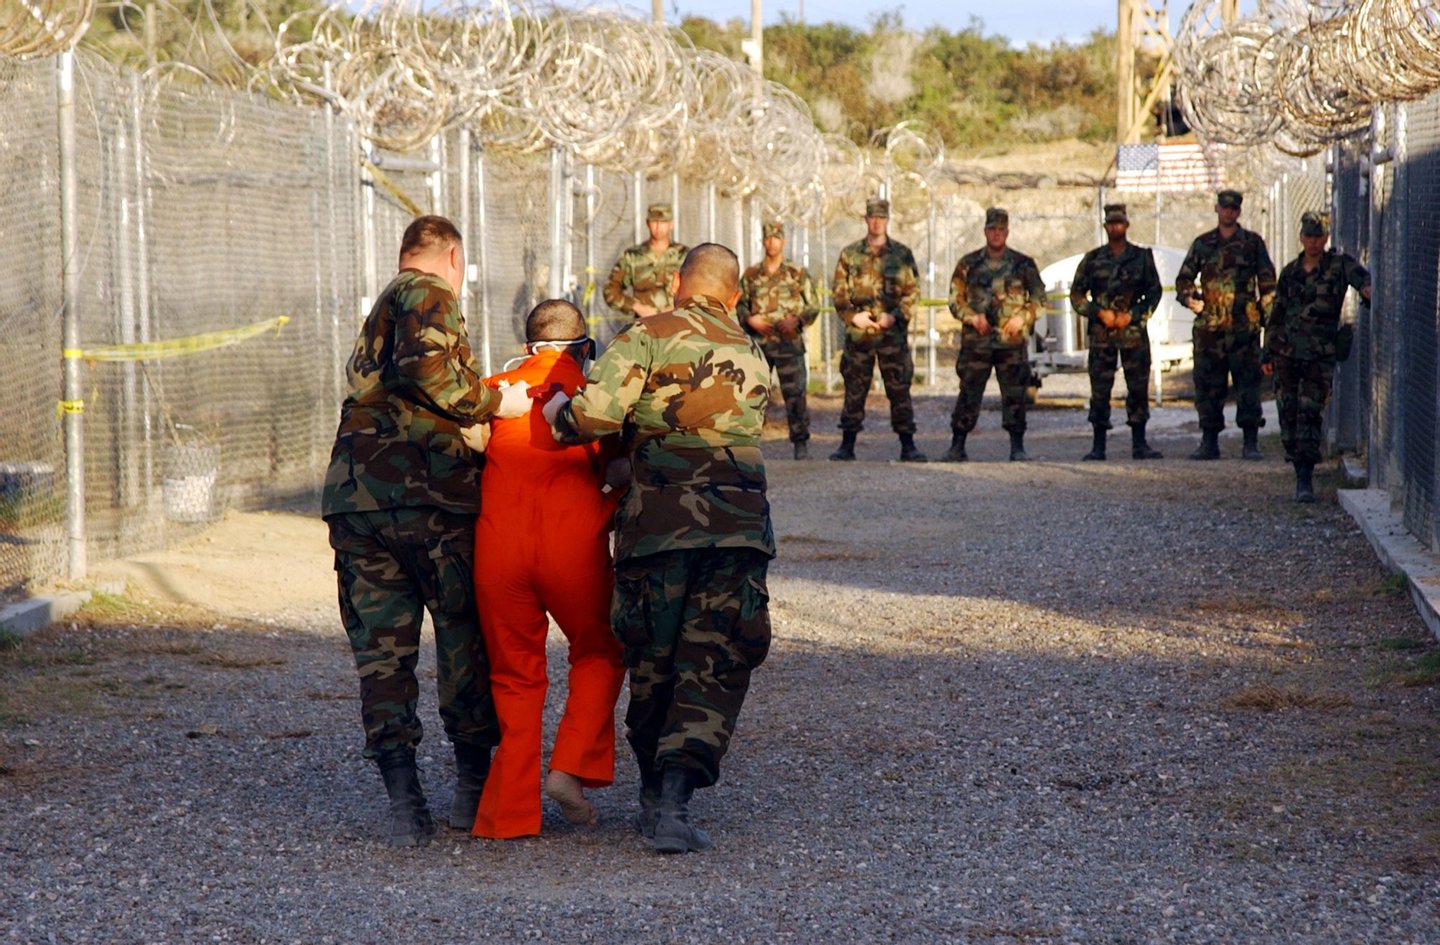 399884 02: U.S. Army Military Police escort a detainee to his cell January 11, 2001 in Camp X-Ray at Naval Base Guantanamo Bay, Cuba, during in-processing to the temporary detention. The detainees will be given a basic physical exam by a doctor, to include a chest x-ray and blood samples drawn to assess their health, the military said. The U.S. Department of Defense released the photo January 18, 2002. (Photo by Petty Officer 1st class Shane T. McCoy/U.S. Navy/Getty Images)